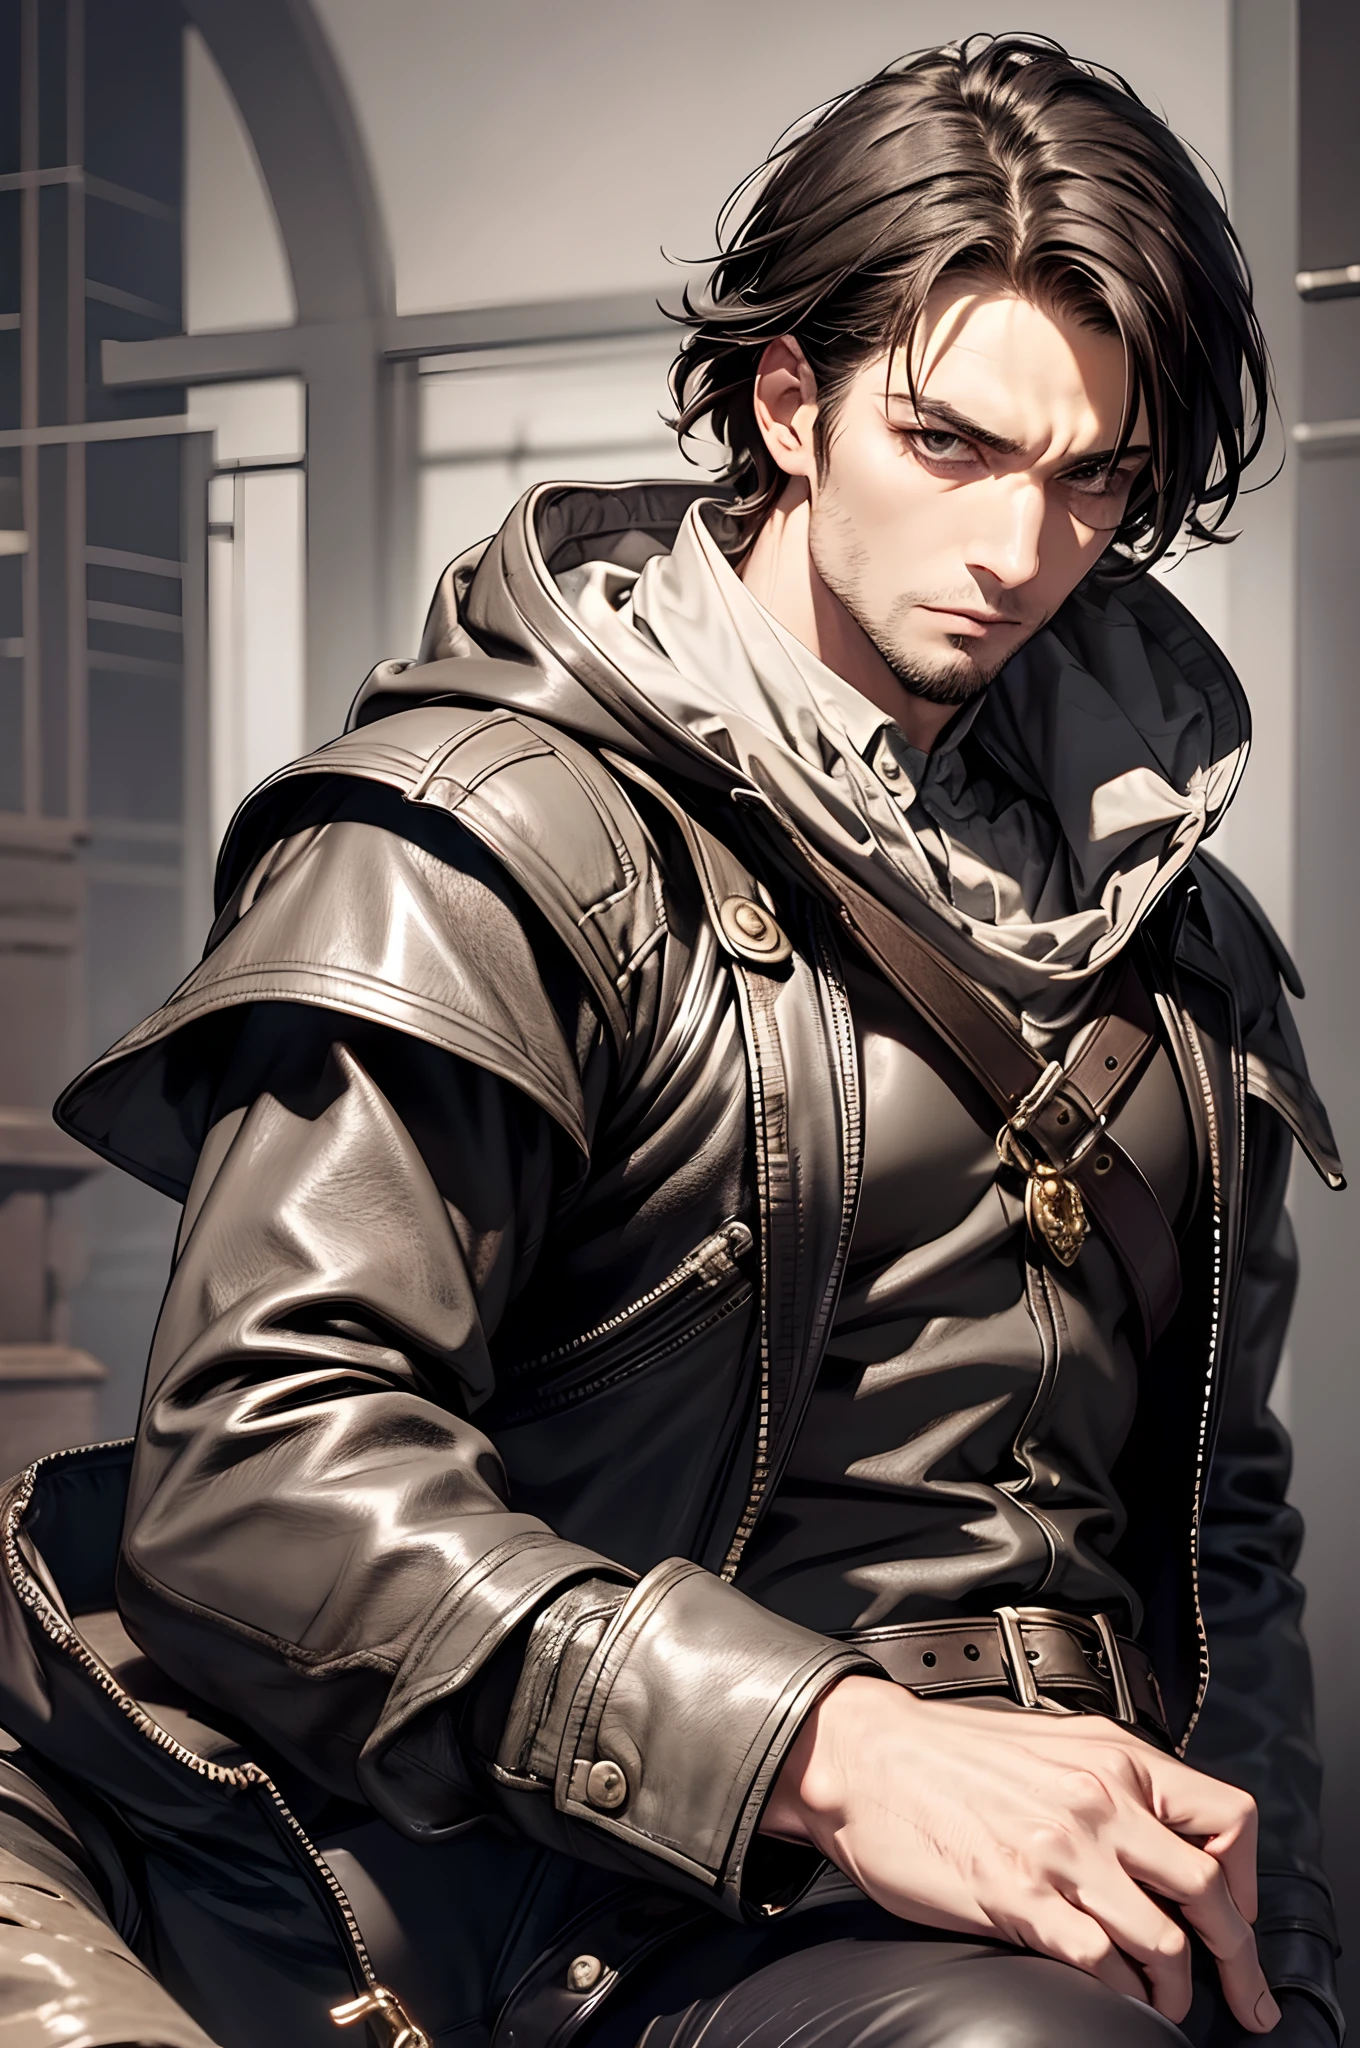 (absurderes, hight resolution, ultra-detailliert), 1 male, Adult, Handsome, High muscular face, broad shoulders, finely detailed eyes, Short black hair, Brown eyes, Black cloak, Wearing a hood, Leather Vest, Leather bag at waist, 2 daggers on the belt, castle, Atmosphere in the Middle Ages, Natural Light and Shadow, Bright particles fly around a man, Fantastic, Mysterious, Bright glow,  Seated Pose, Serious expression, Cold, thoughtful, Mouth Shut